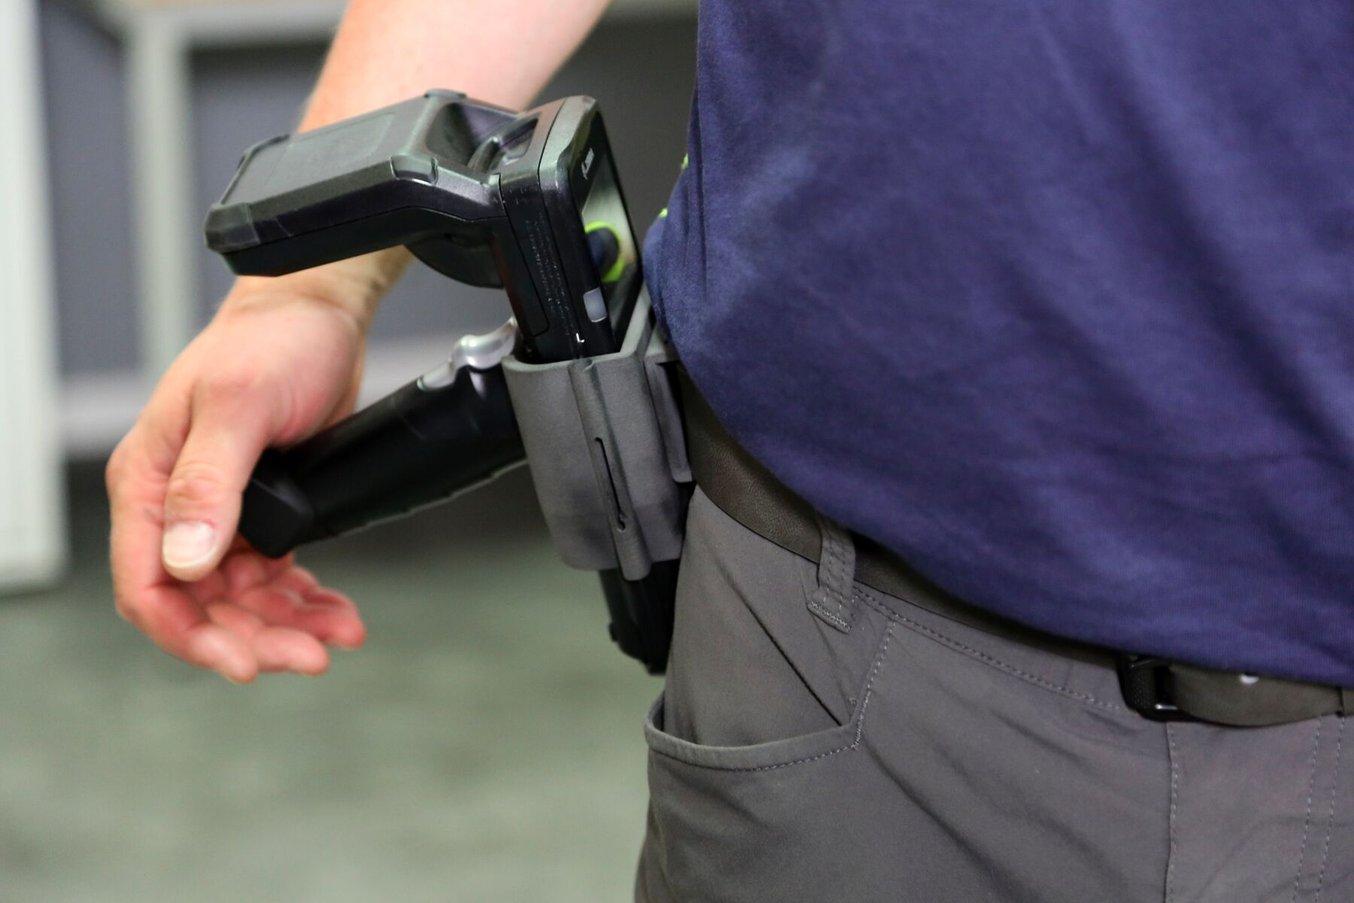 Employees in materials management needed a way to mount handheld scanners, so they could keep them close by without continuously occupying one of their hands.